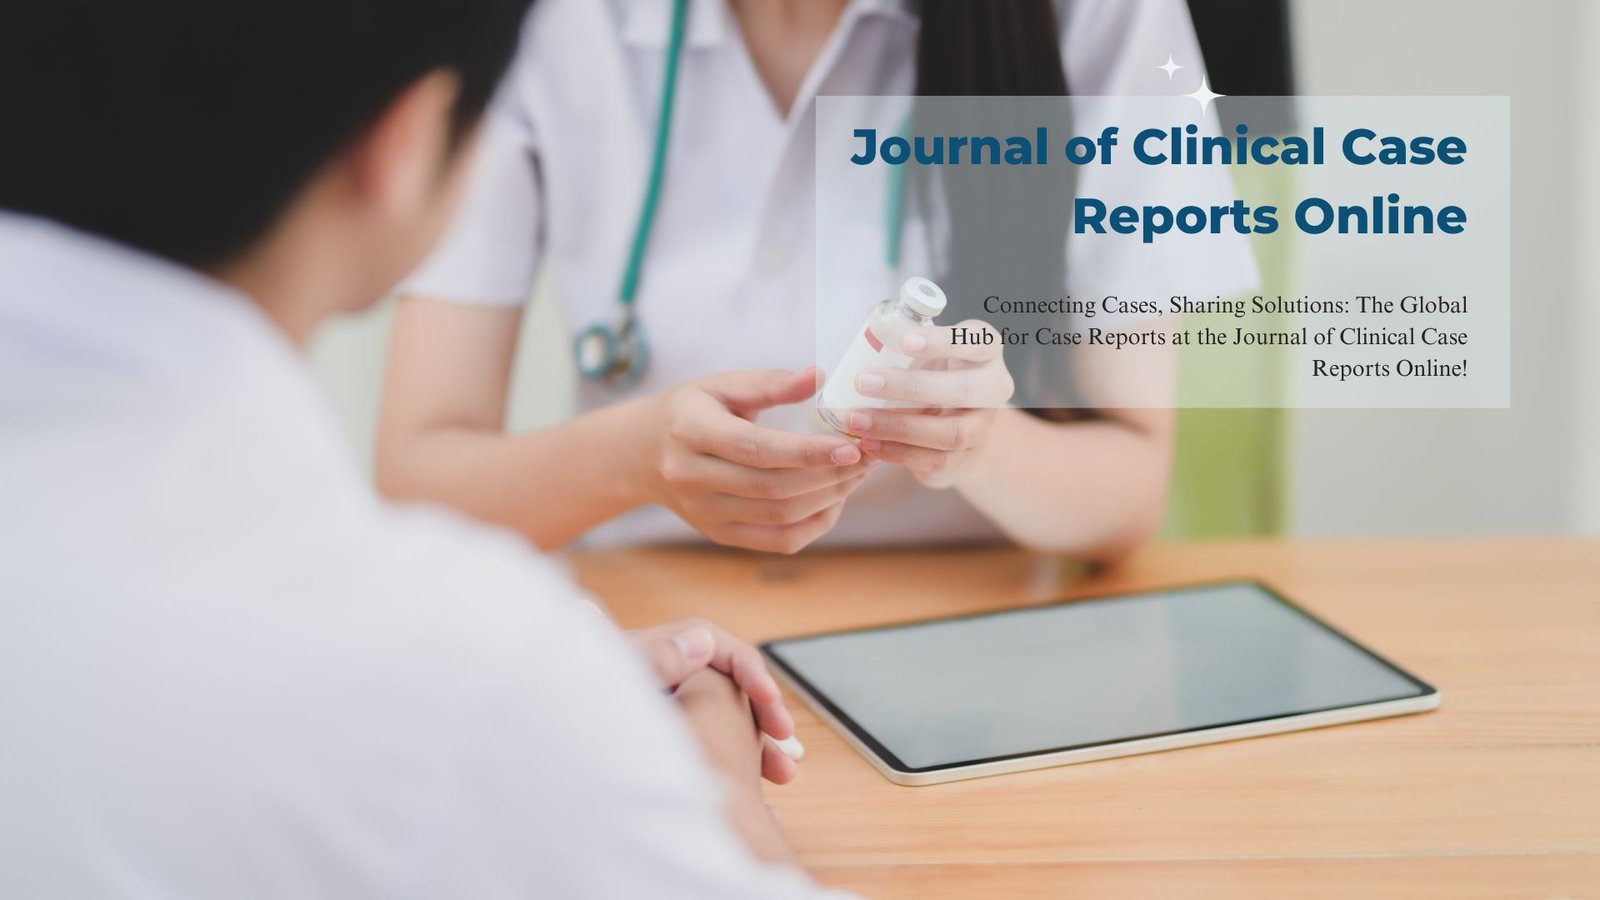 Journal of Clinical Case Reports Online